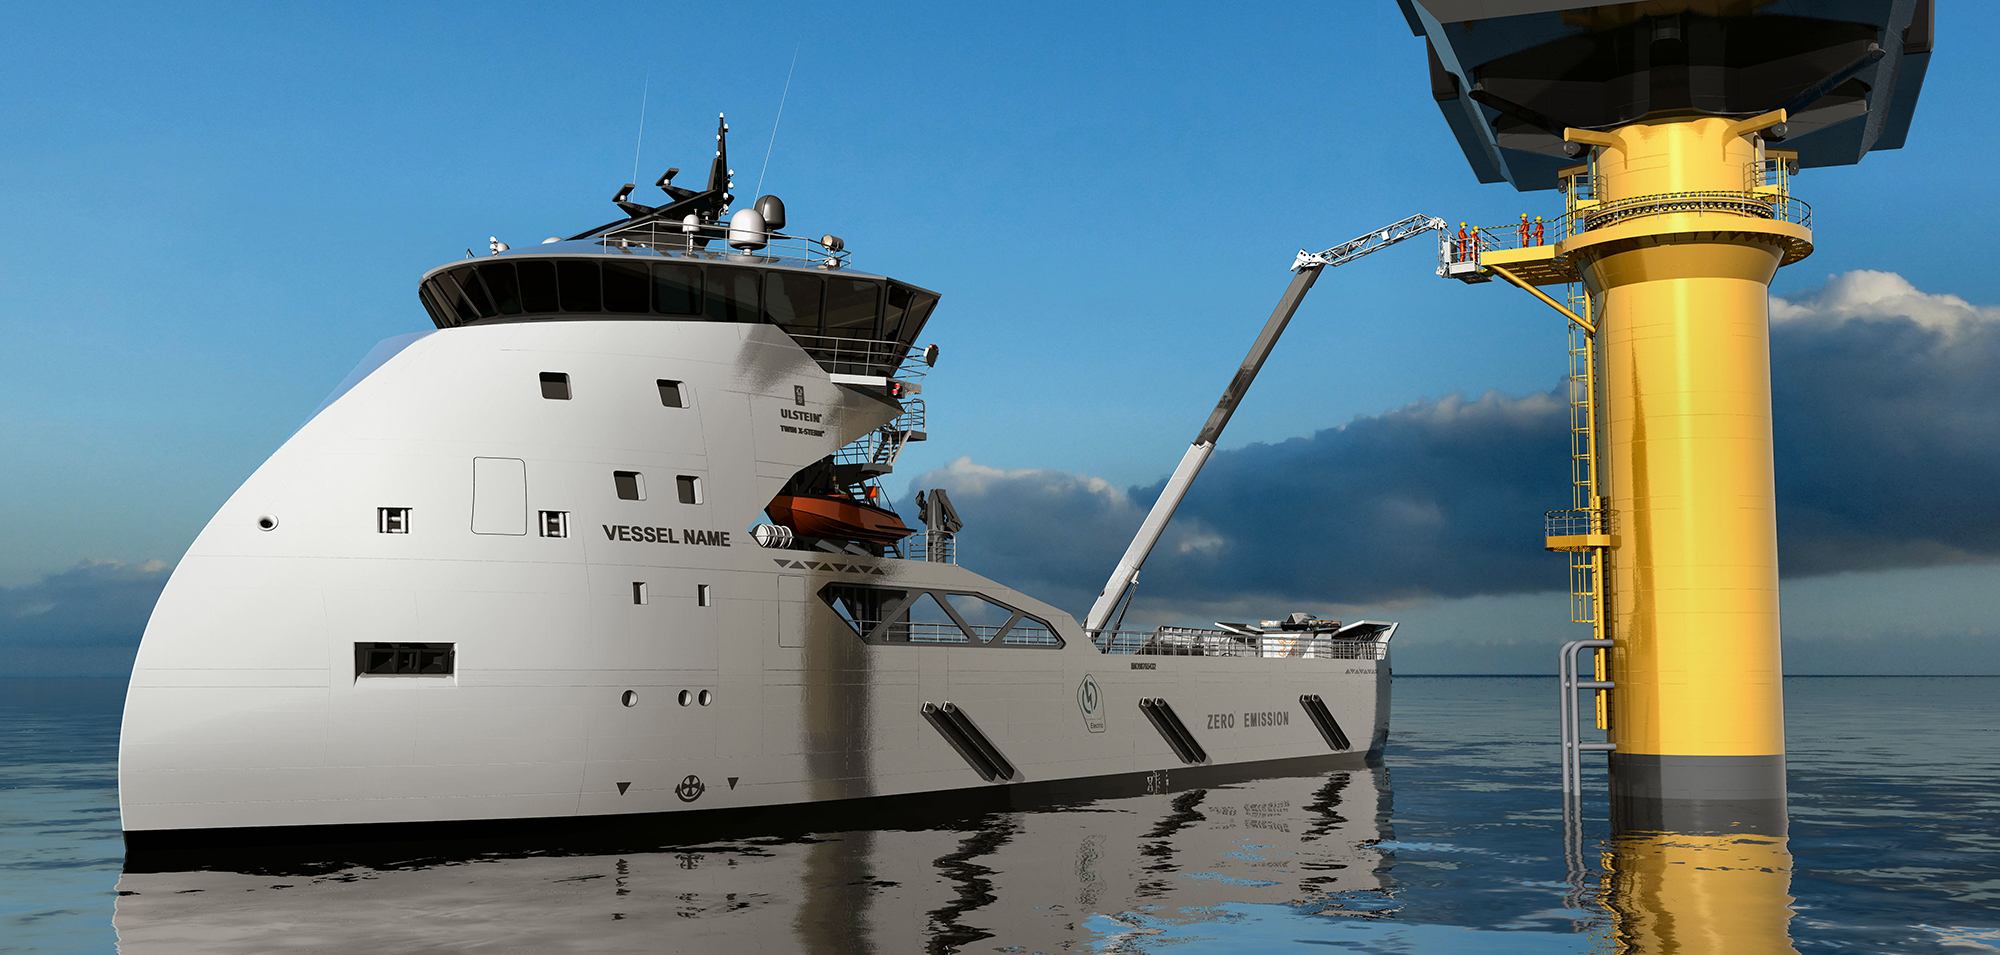 There will be a demand for supply vessels ahead, and the future vessels will differ from traditional solutions. Such as the full-electric PSV developed by Ulstein.